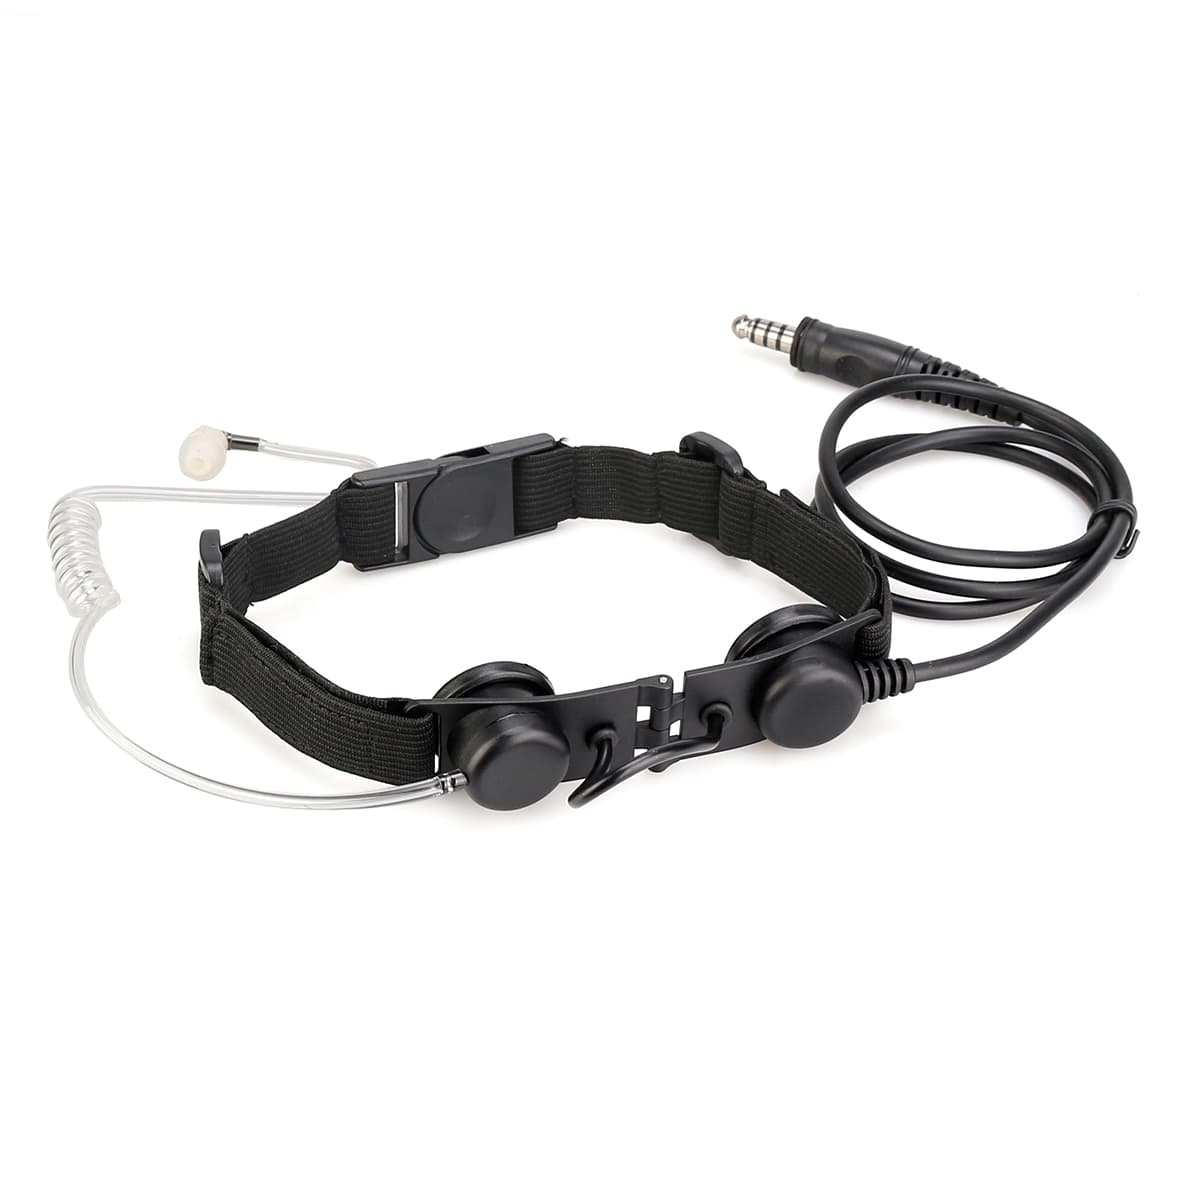 Hytera PD780 Tactical Throat Microphone